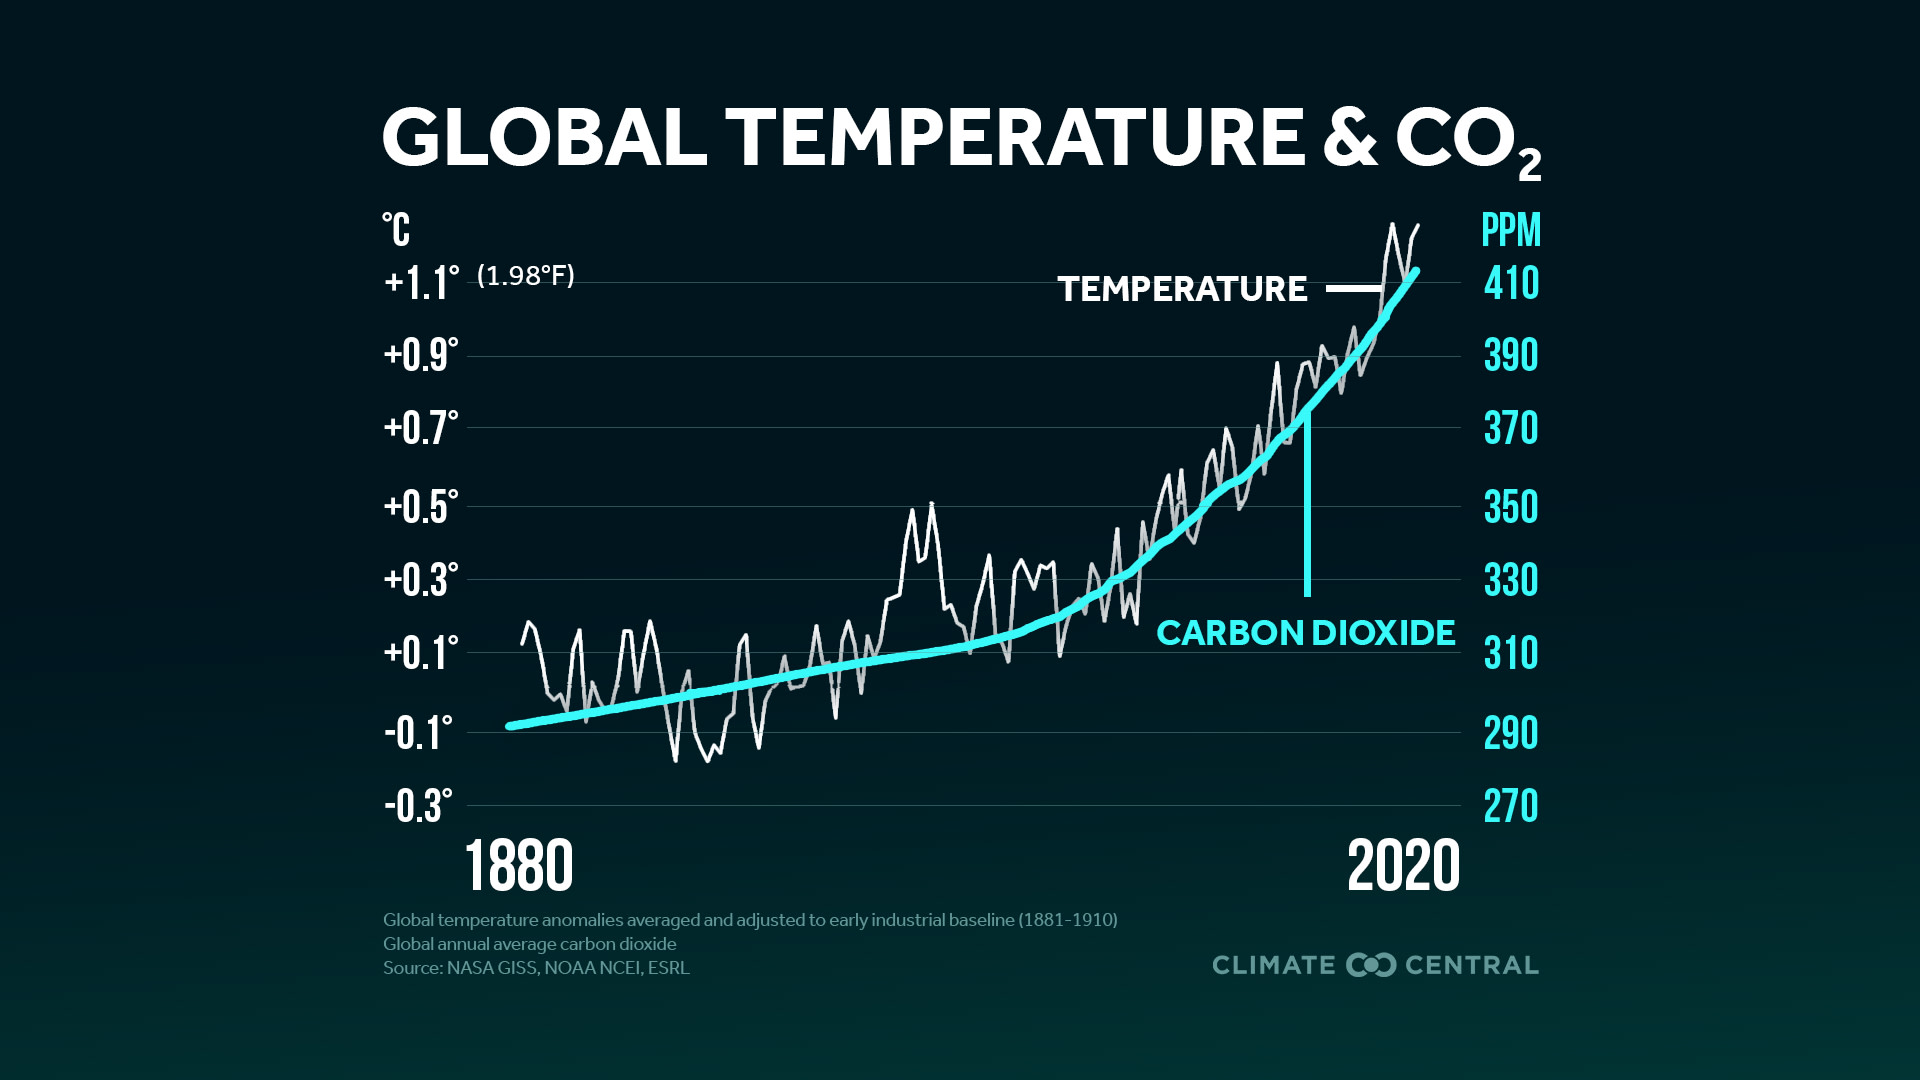 Global Temperature & CO2 - Yearly Carbon Dioxide Peak